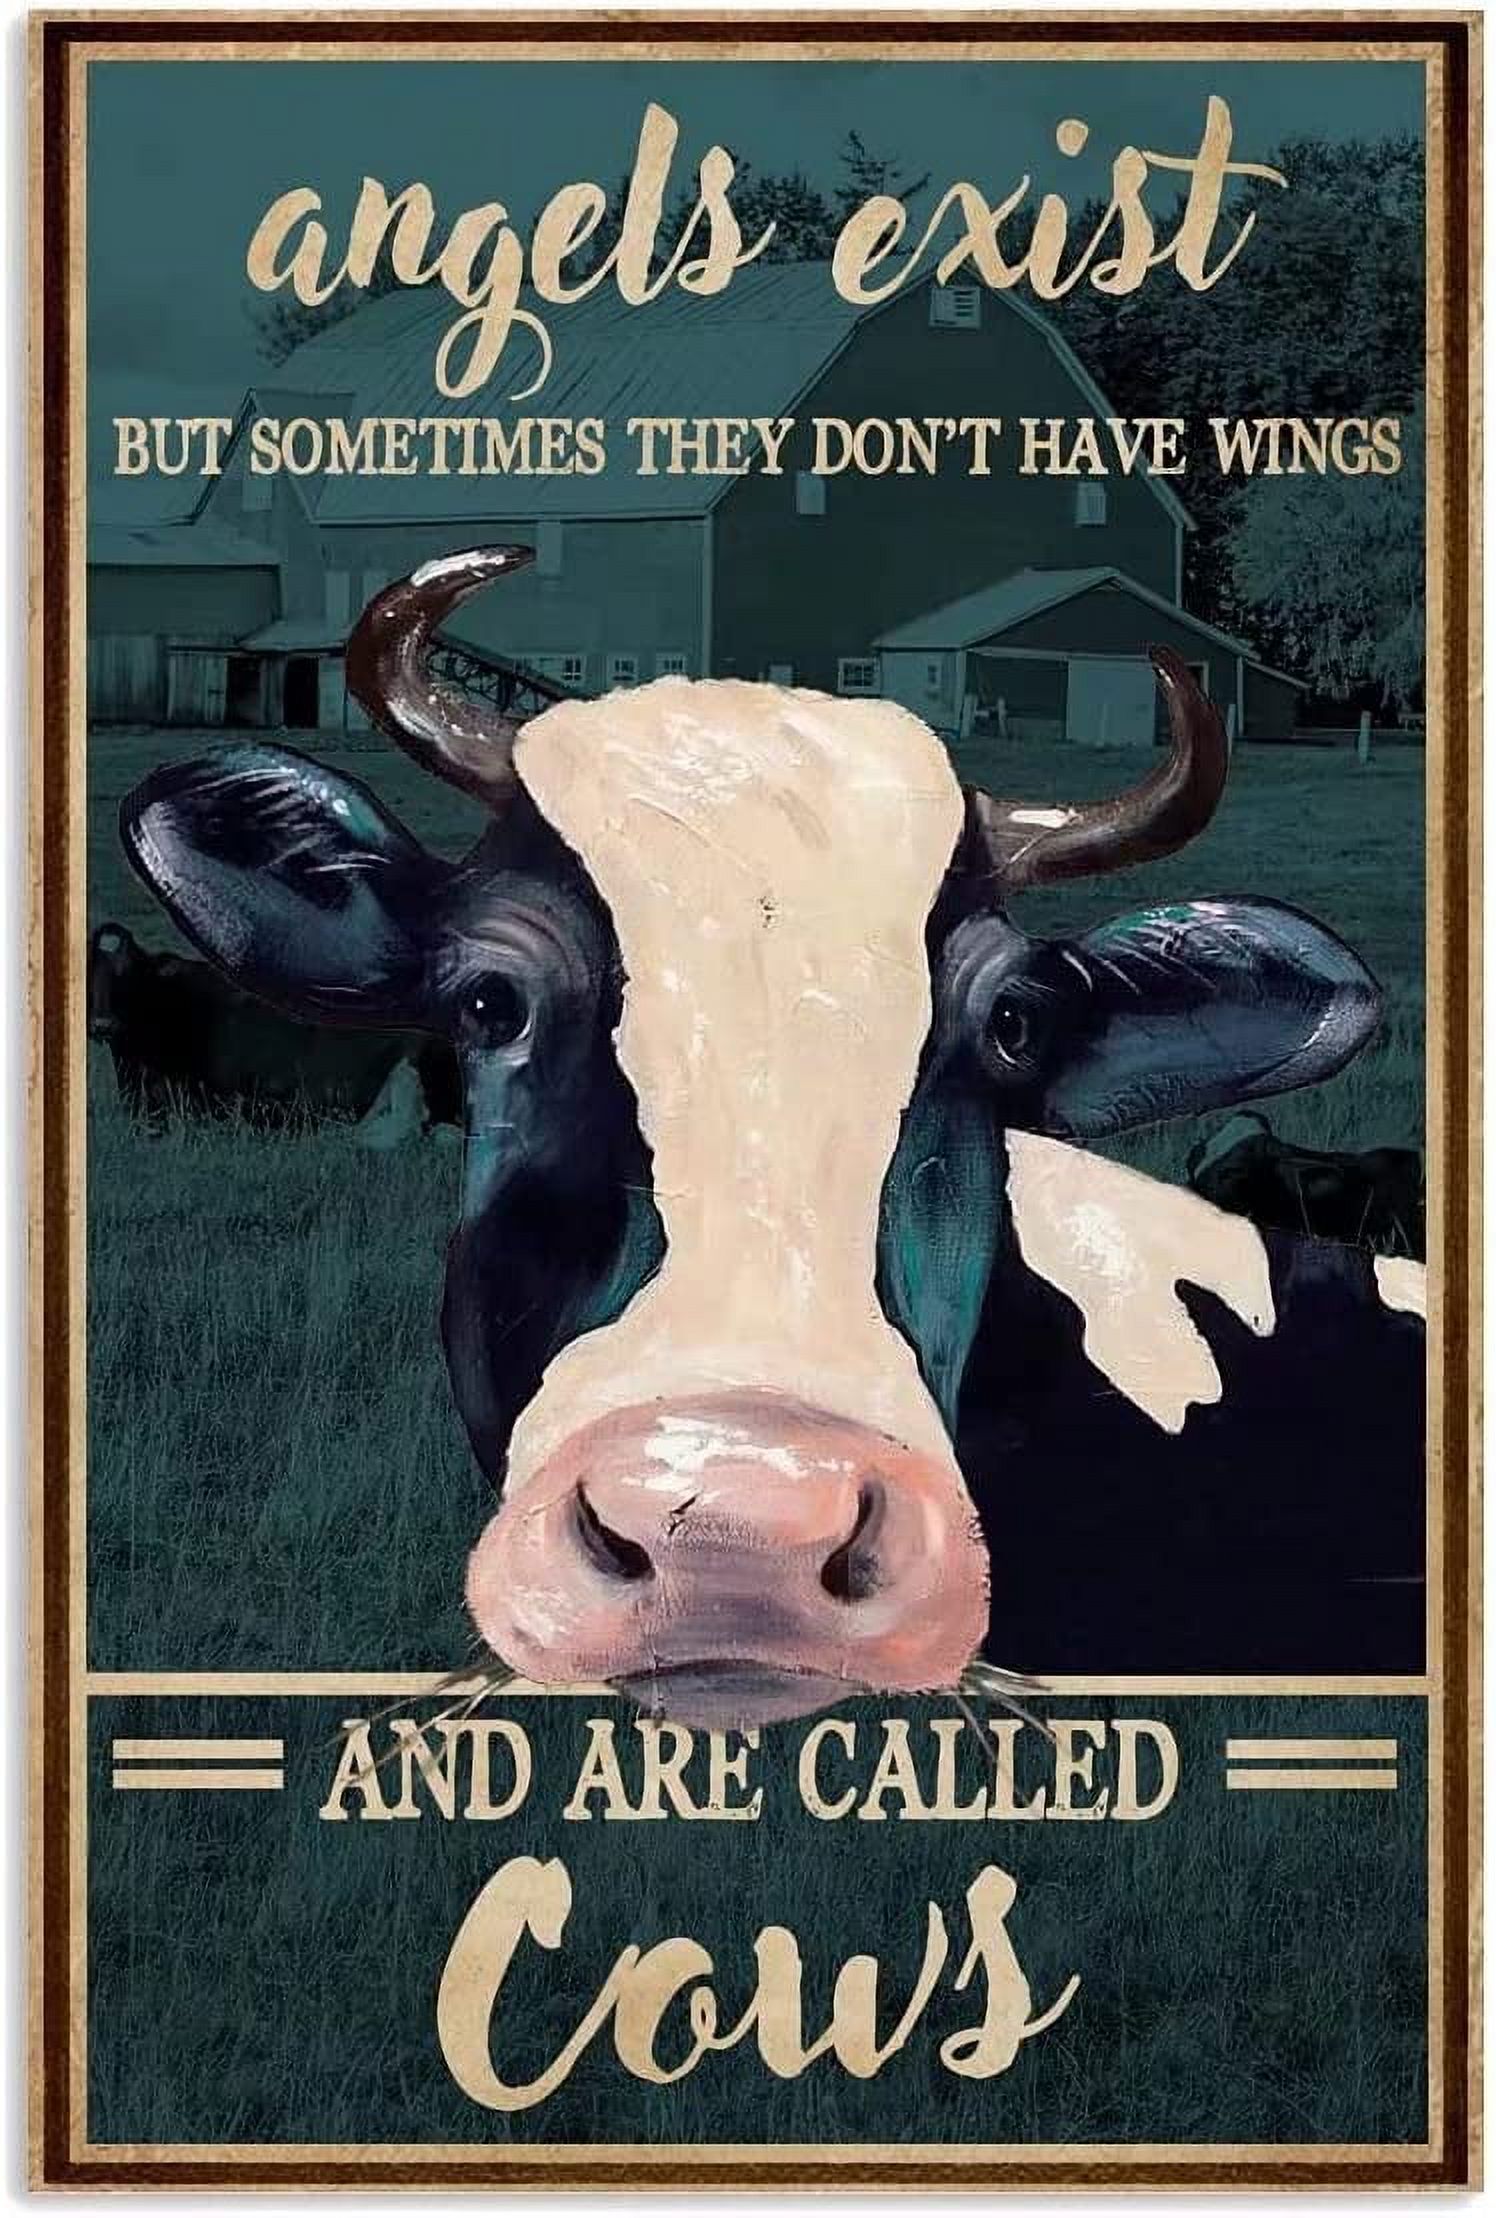 Metal Tin Sign Angels Exist But Someone They Don't Have Wings And Are Called Cows Vintage Home Farmhouse Art Decor Metal Poster Plaque For Home Kitchen Farm Coffee Bar Art Iron Painting 8x12 Inch - image 1 of 5